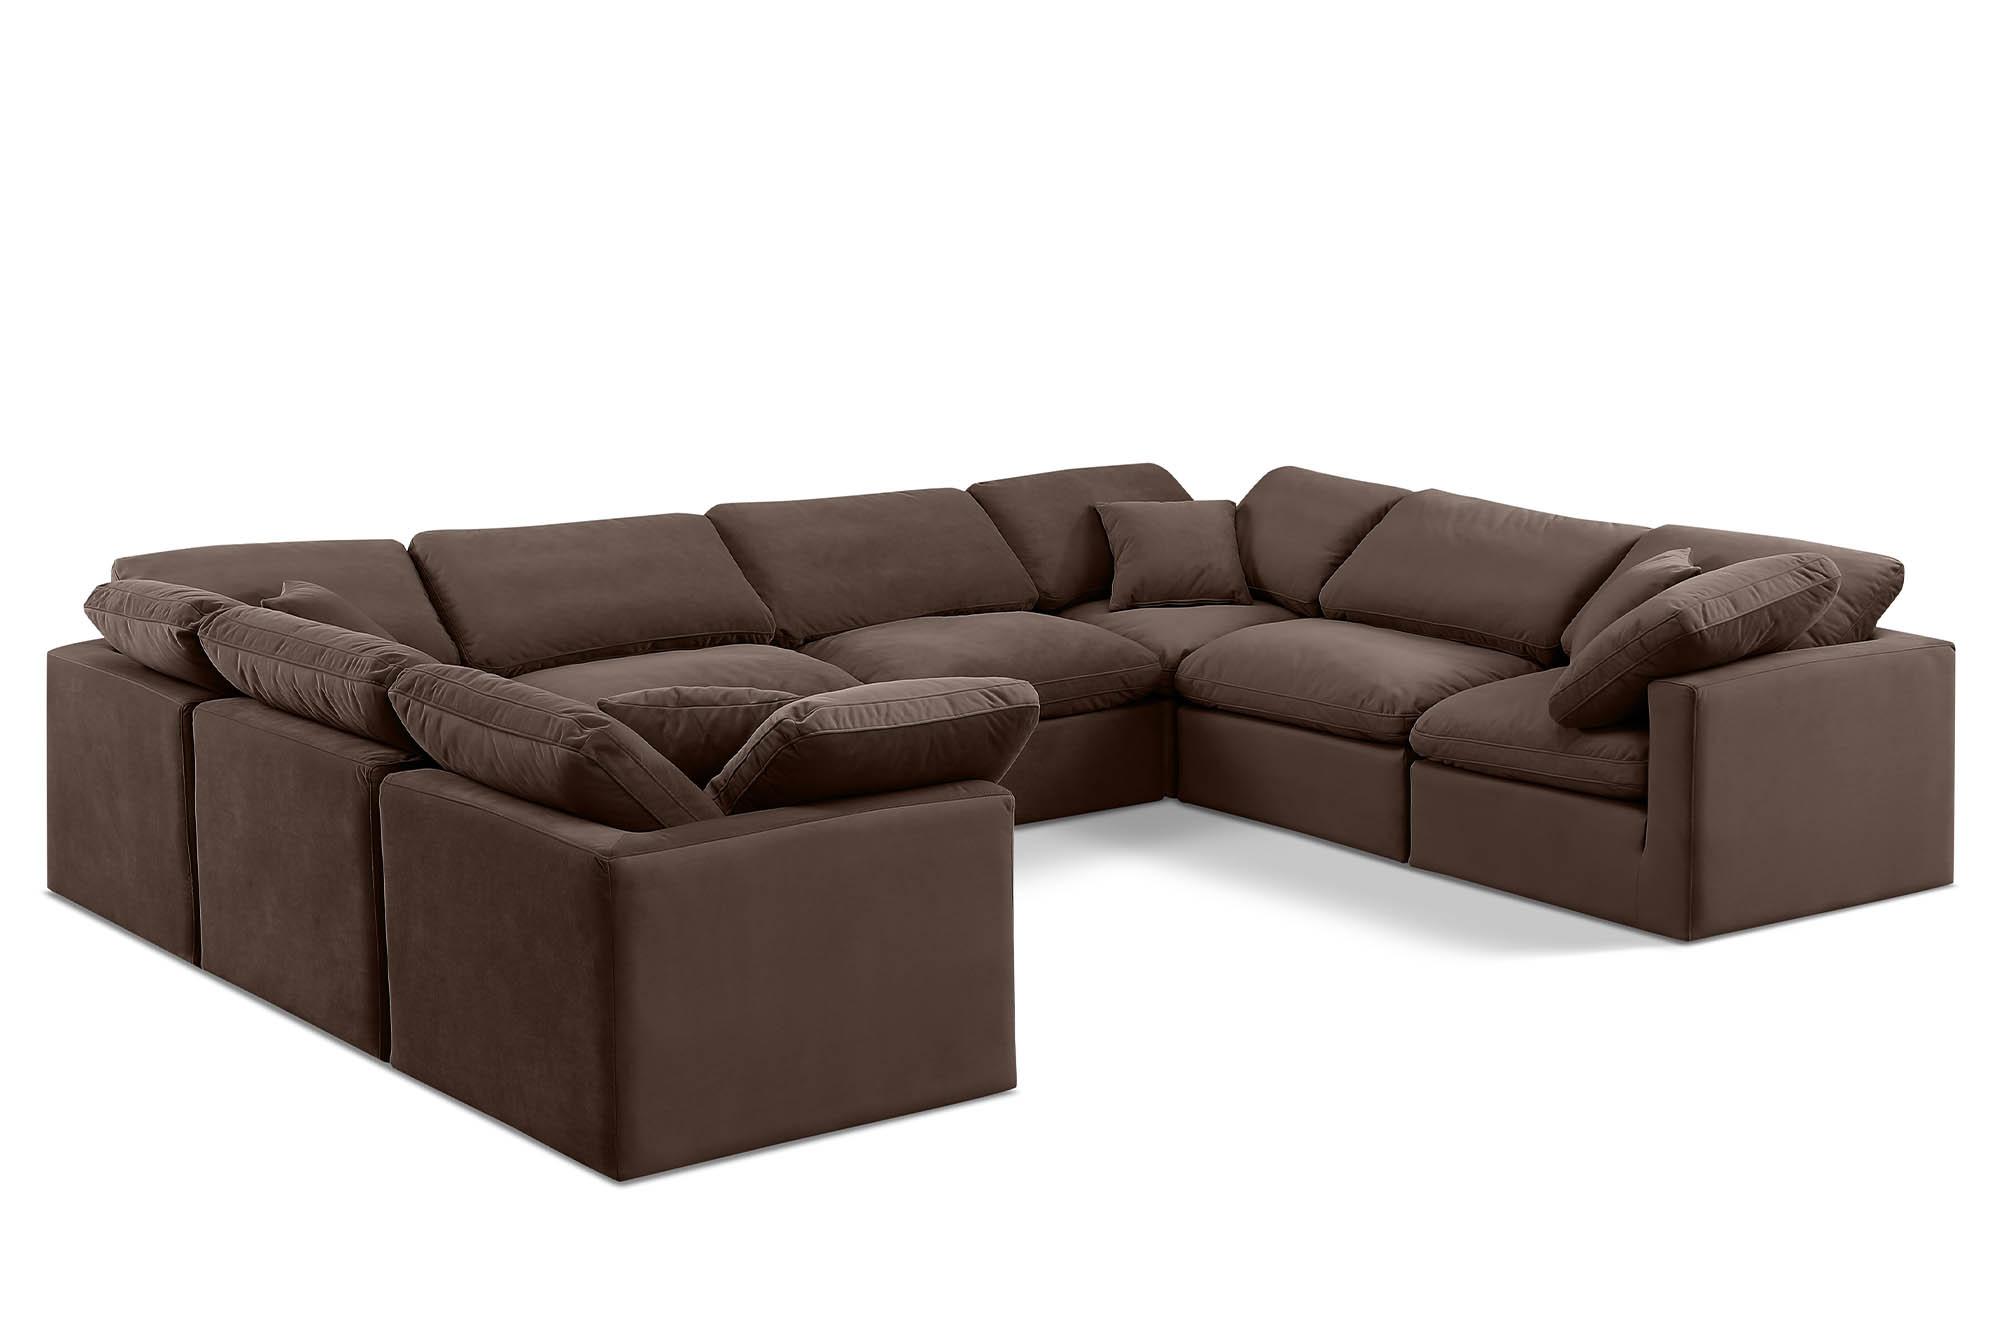 Contemporary, Modern Modular Sectional Sofa INDULGE 147Brown-Sec8A 147Brown-Sec8A in Brown Velvet